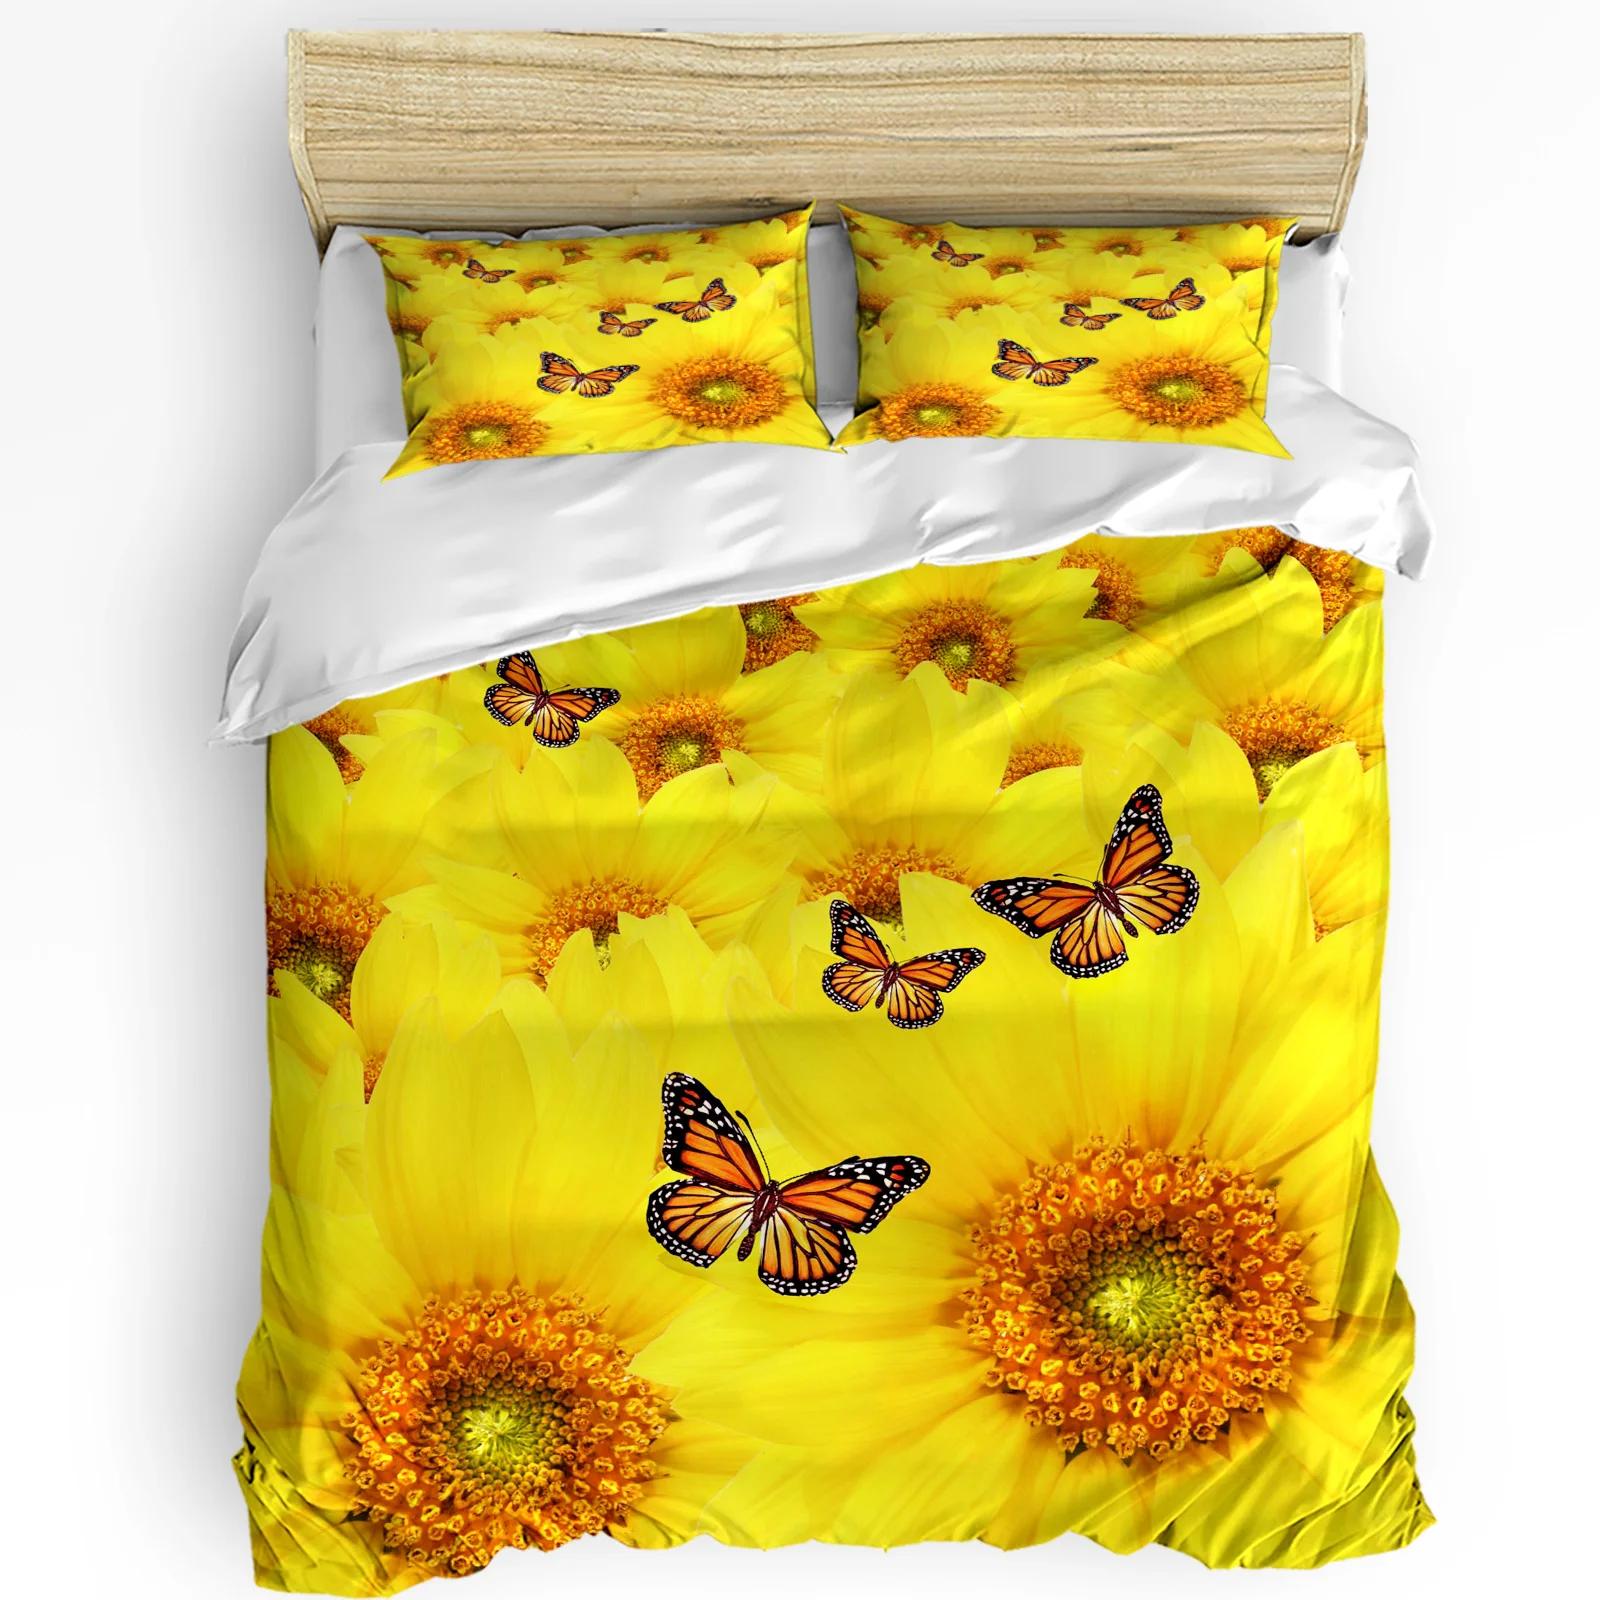 Yellow Sunflower Butterfly Flowers Plant Bedding Set 3pcs Duvet Cover Pillowcase Quilt Cover Double Bed Set Home Tex